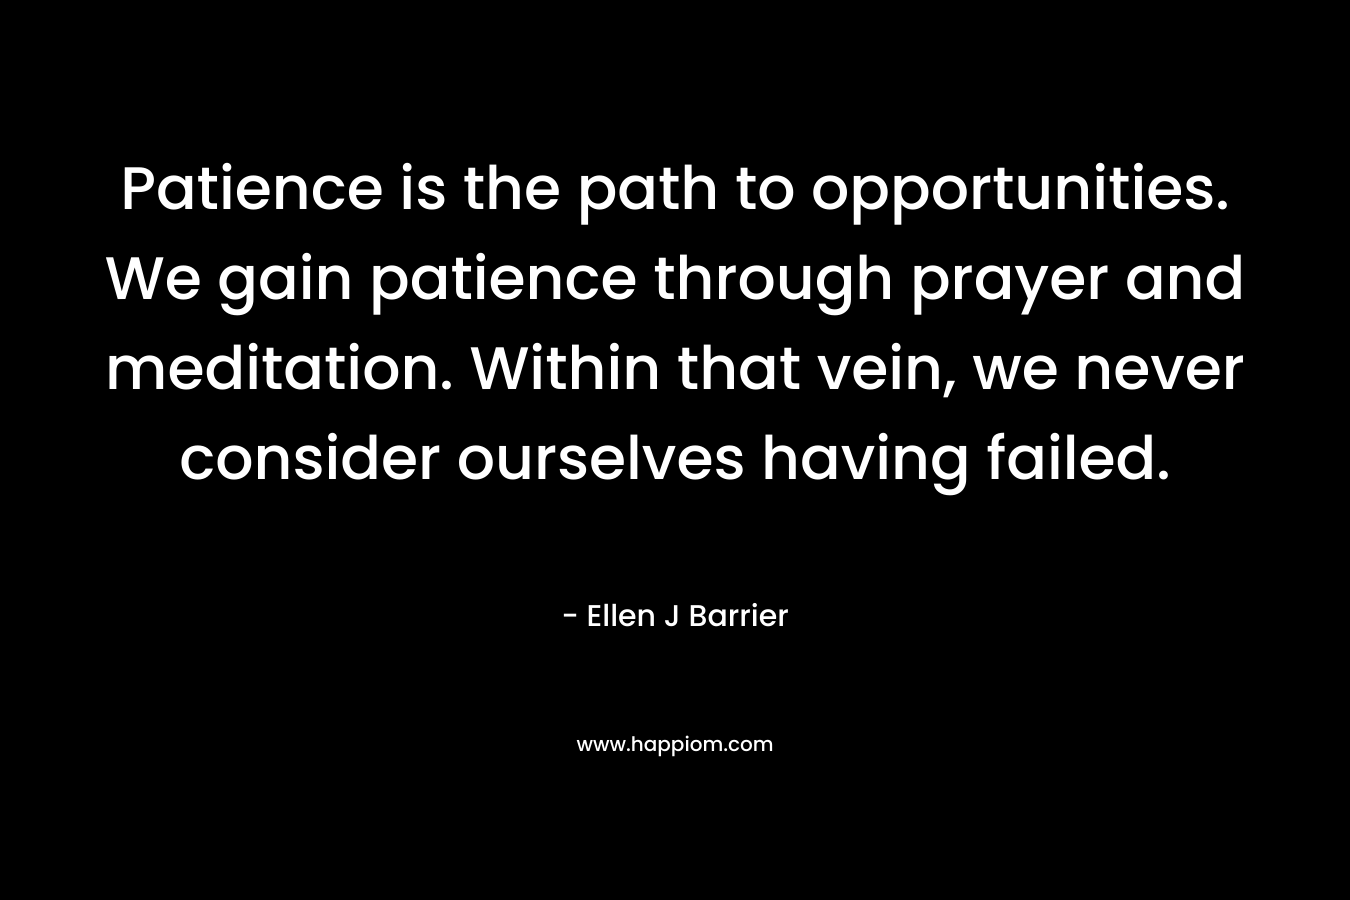 Patience is the path to opportunities. We gain patience through prayer and meditation. Within that vein, we never consider ourselves having failed. – Ellen J Barrier